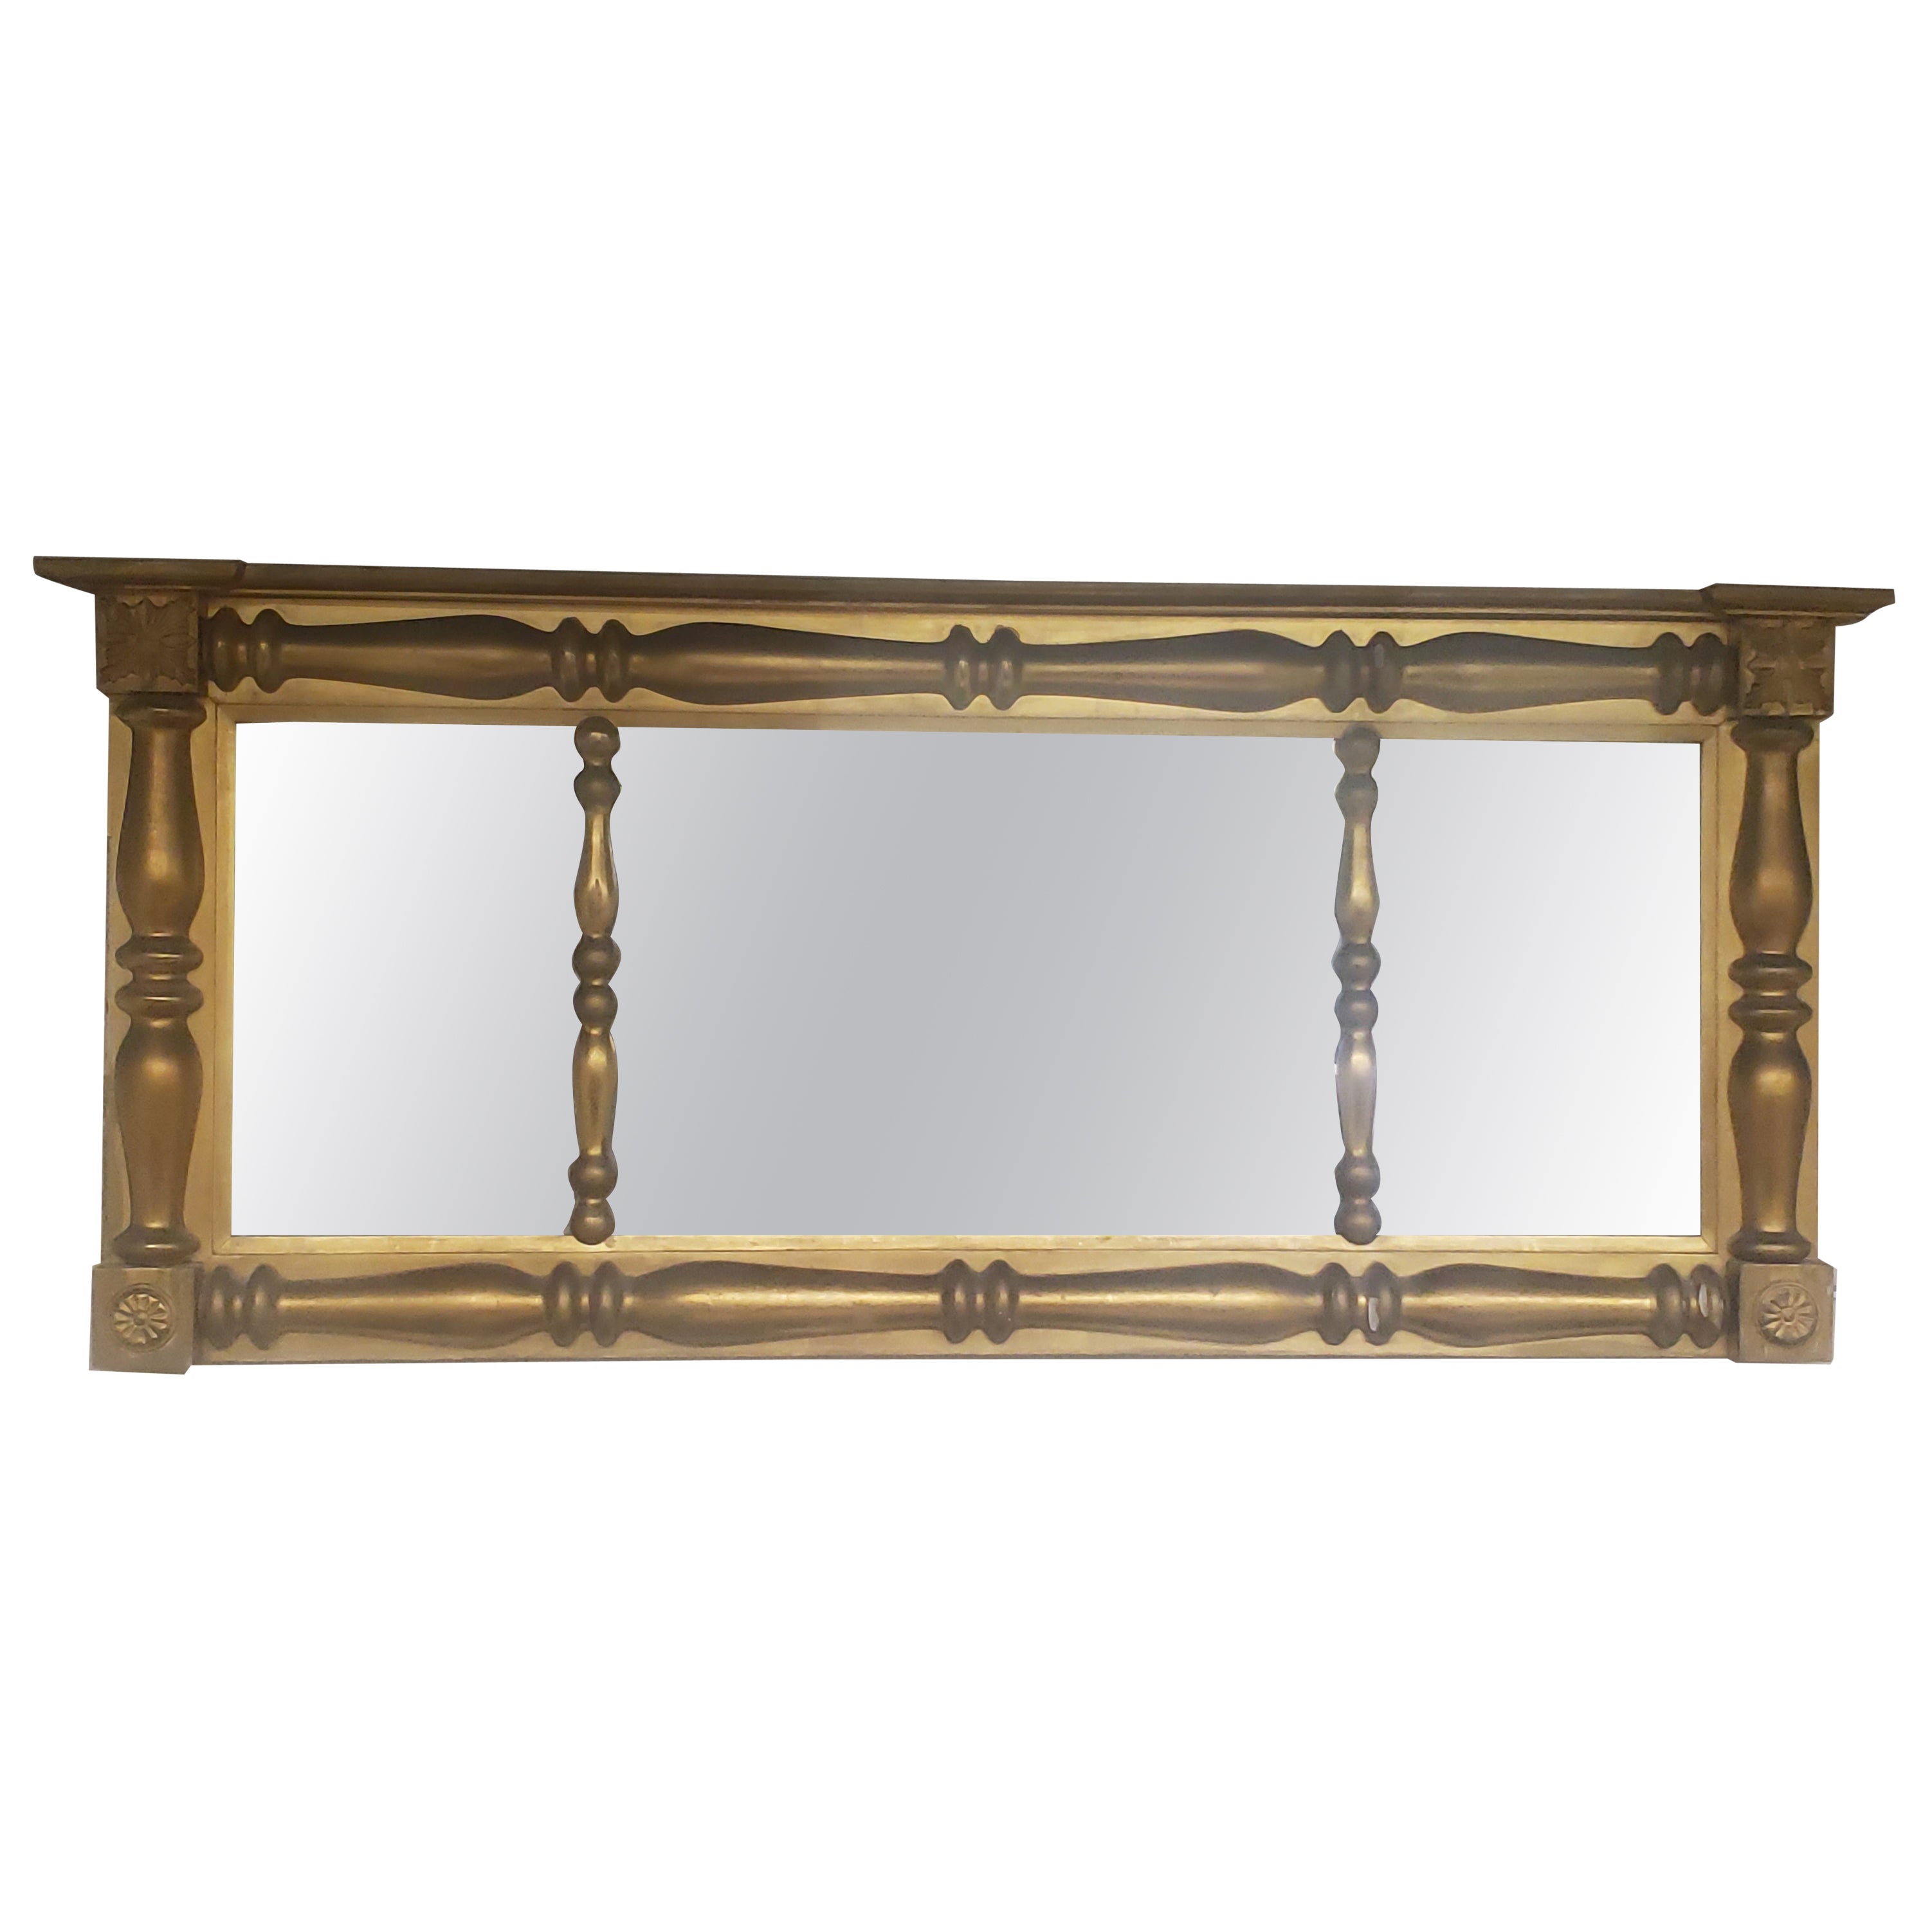 Late 19th C. Georgian Style Gilt Decorated Large Over Mantle Mirror For Sale